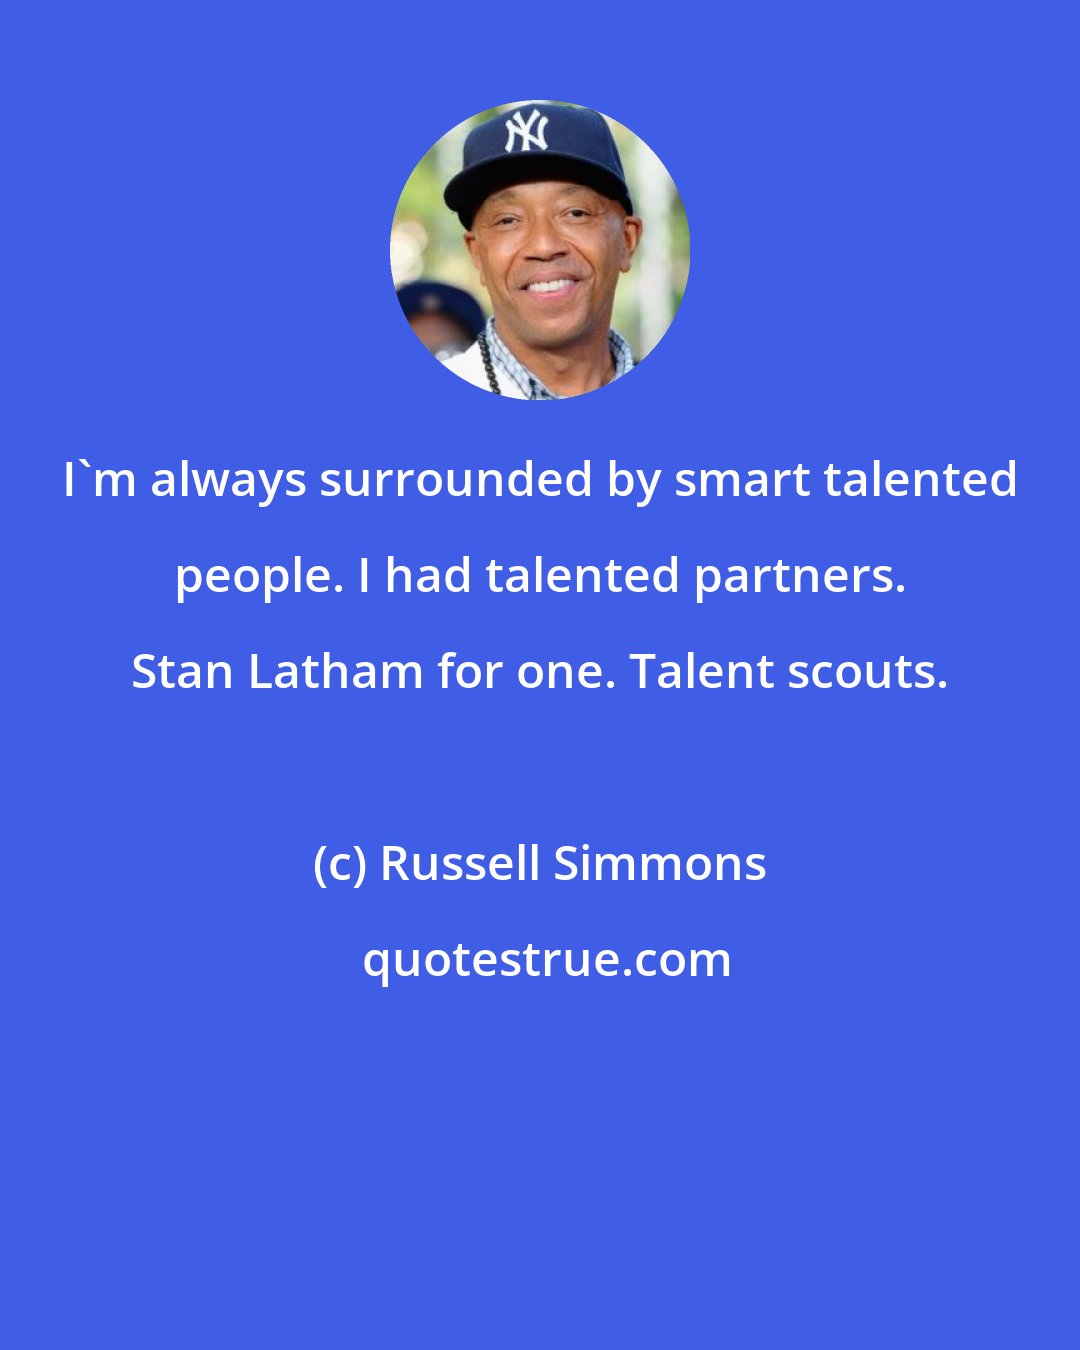 Russell Simmons: I'm always surrounded by smart talented people. I had talented partners. Stan Latham for one. Talent scouts.